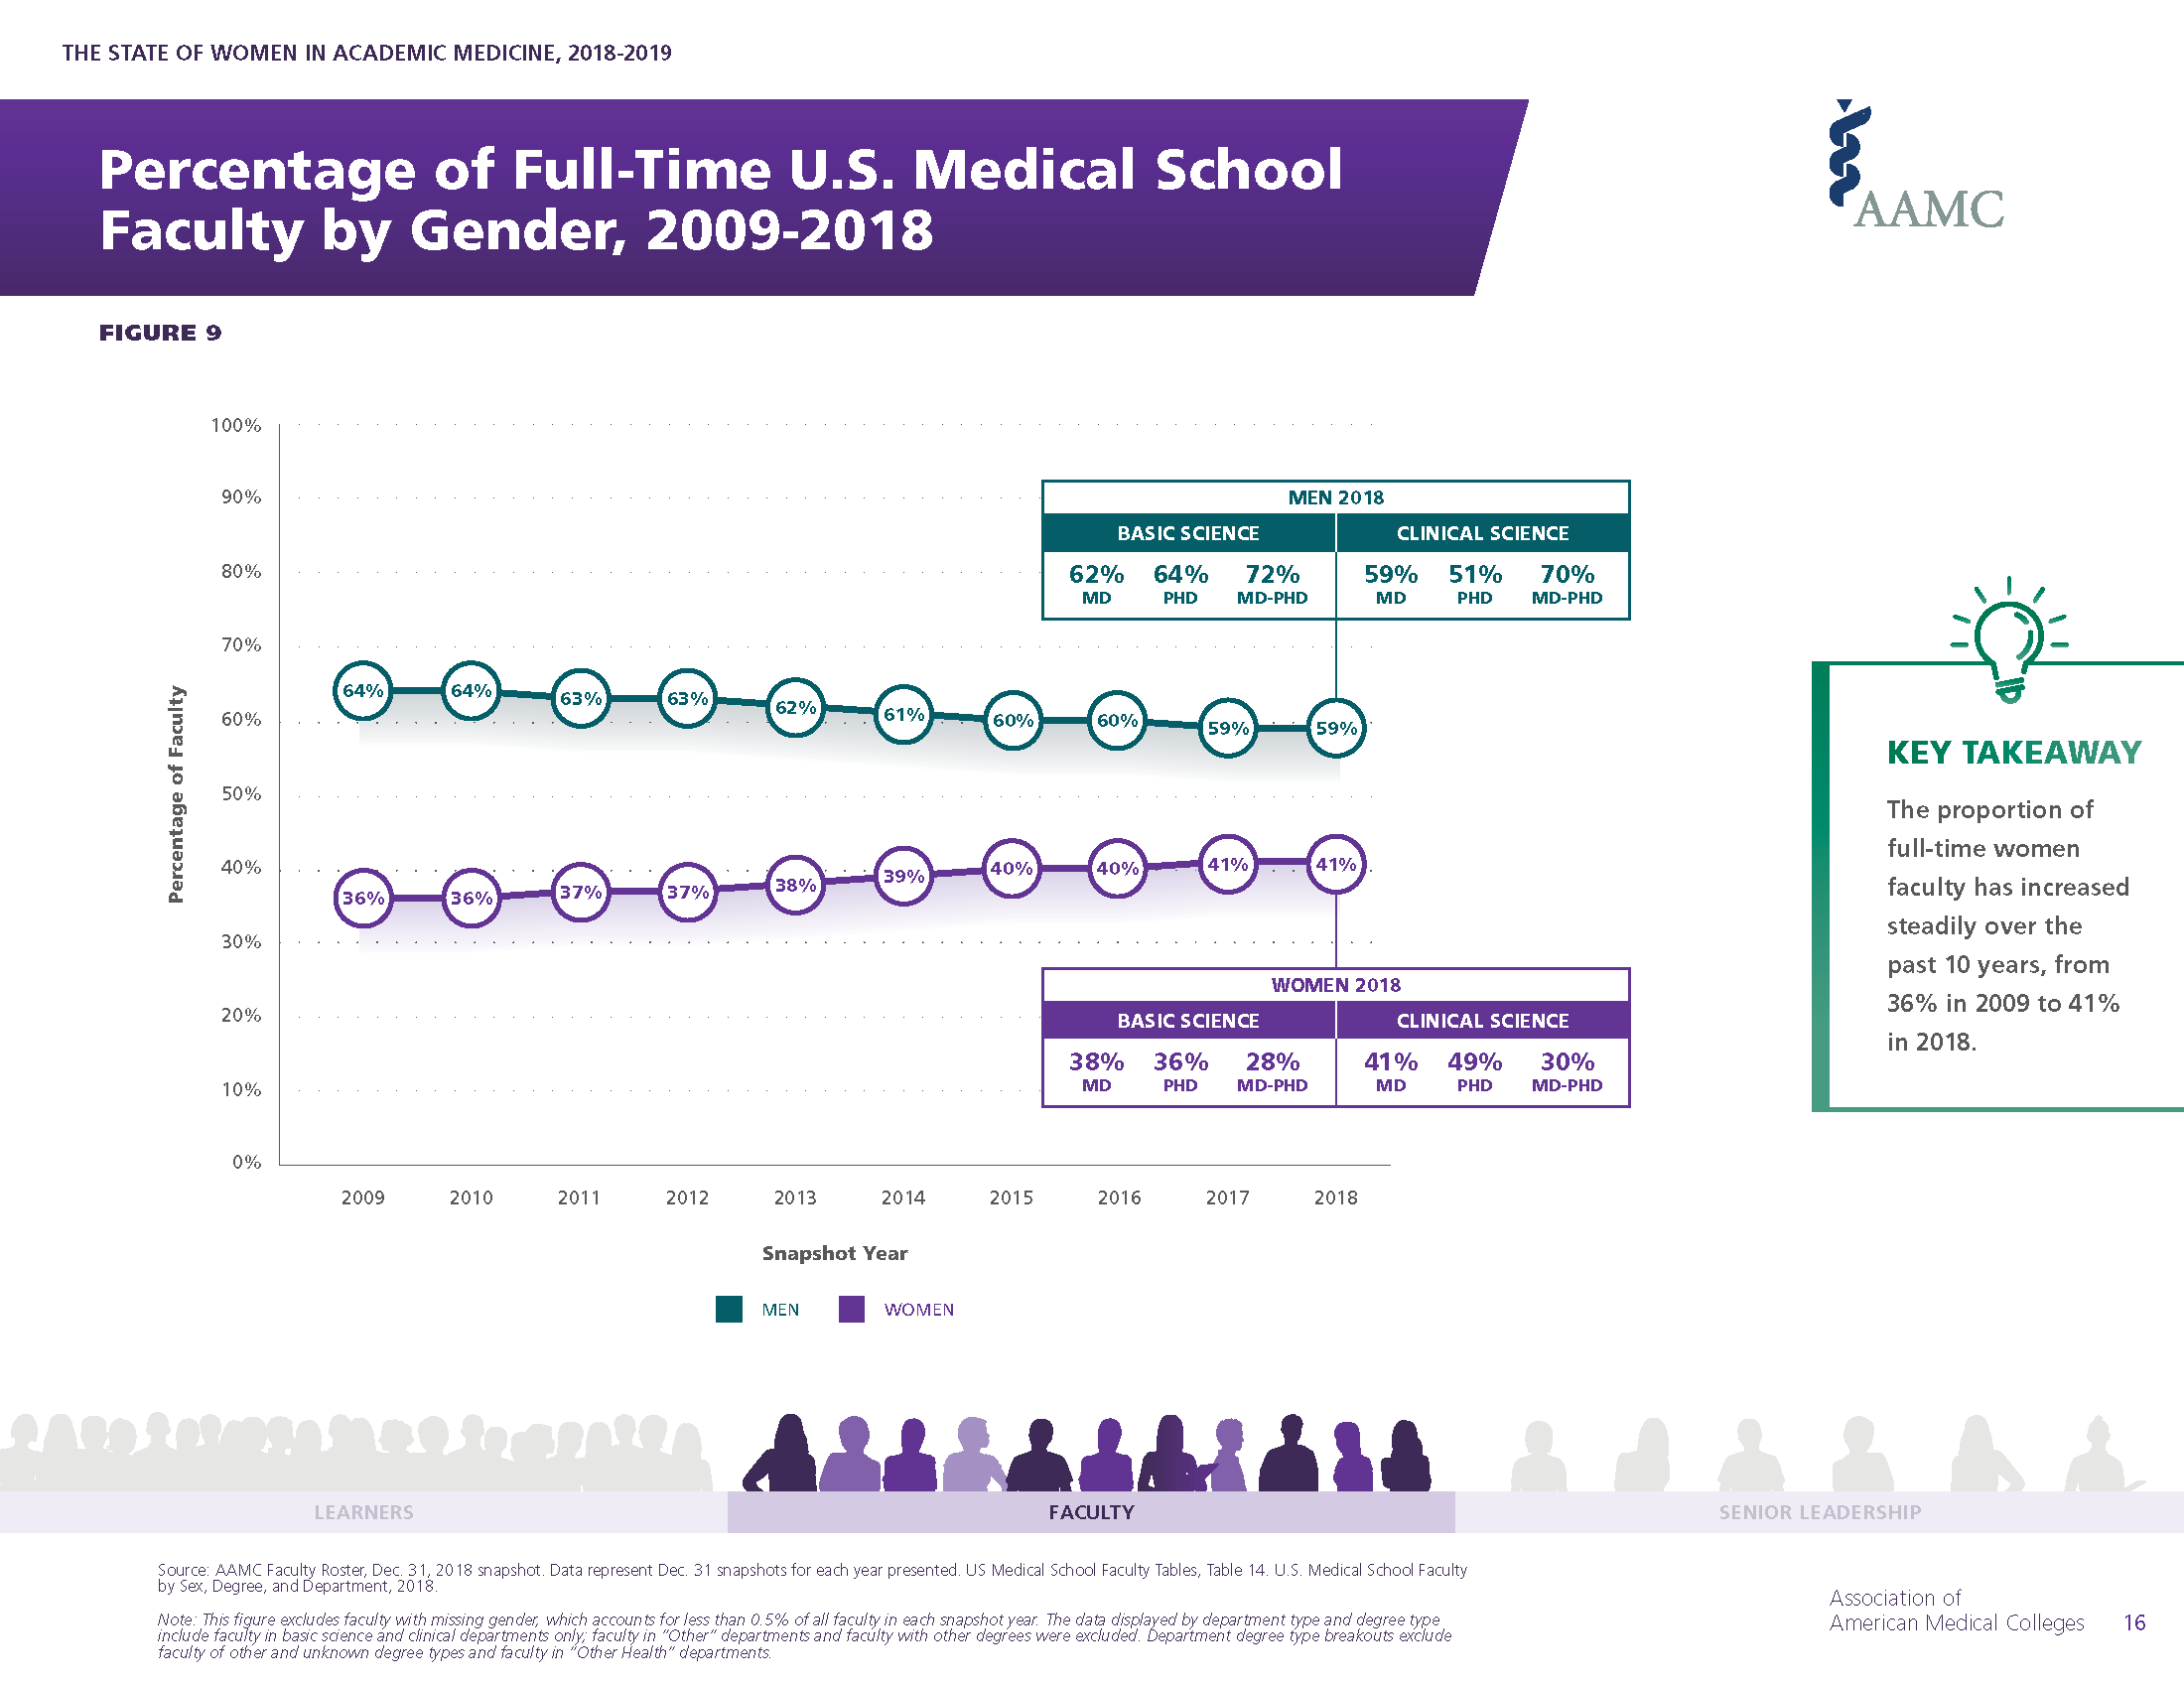 The State of Women in Academic Medicine 2018-2019: Percentage of Full-Time U.S. Medical Faculty by Gender